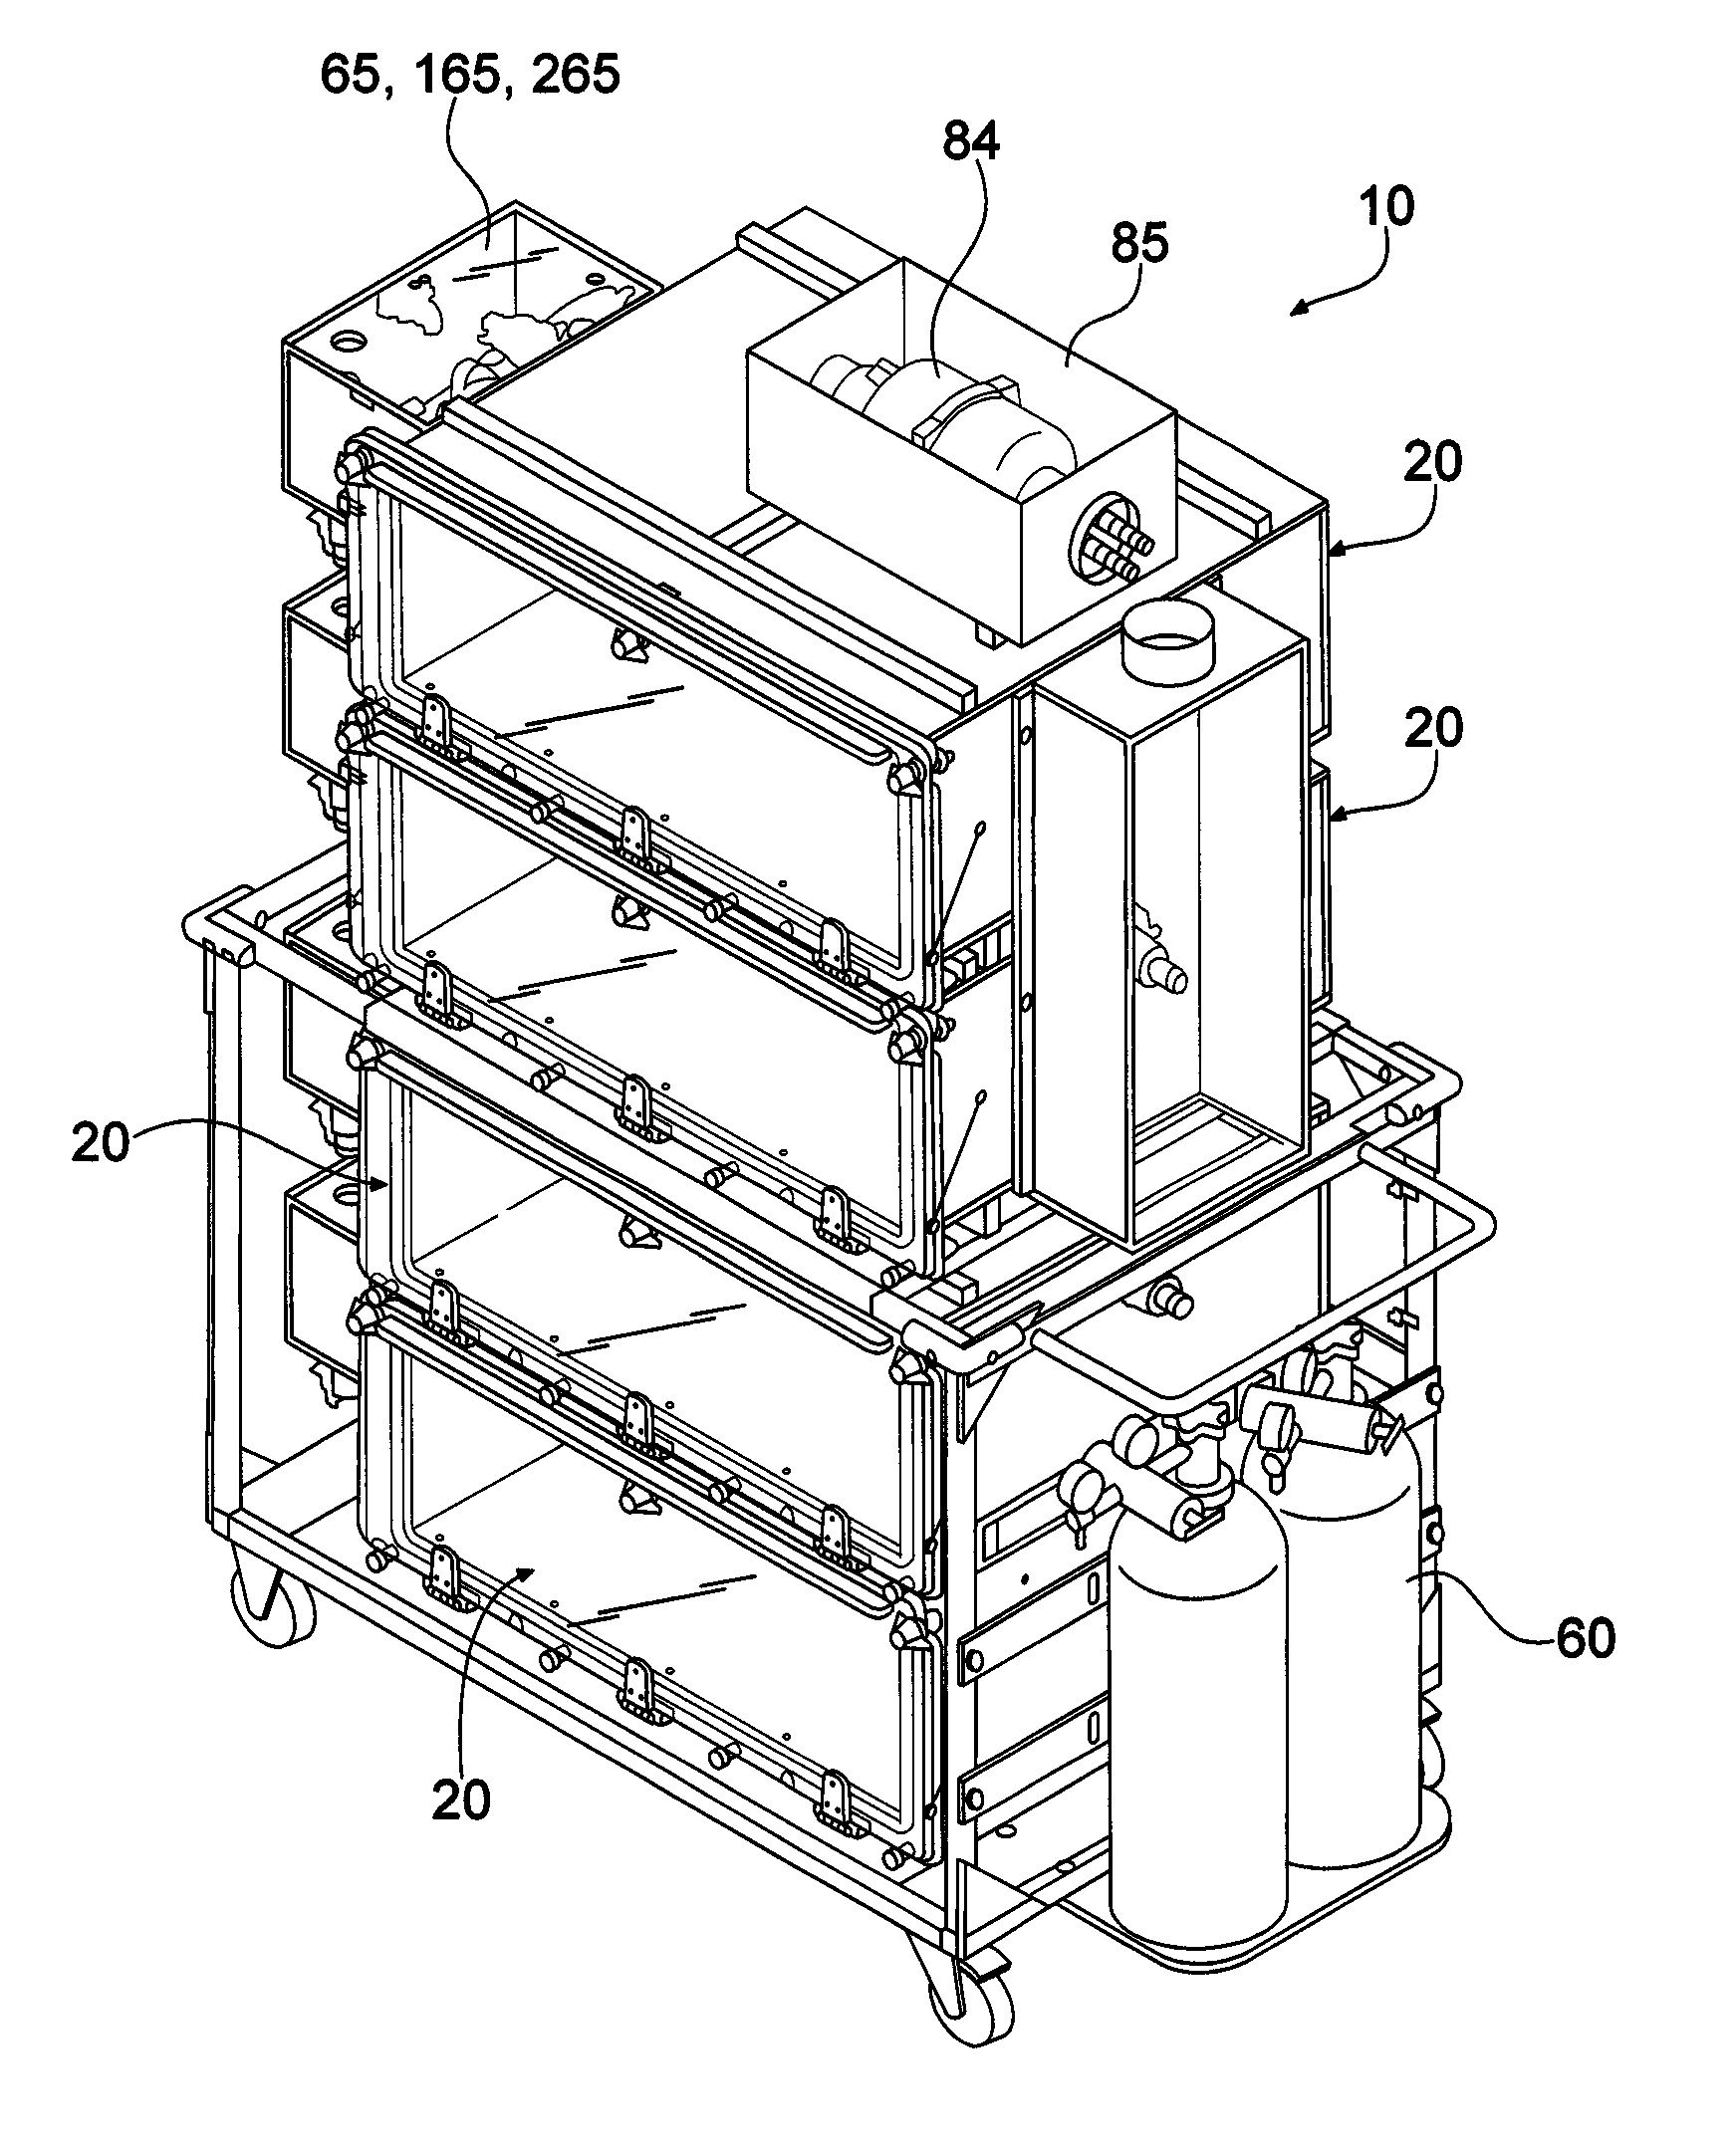 Method and apparatus for euthanizing animals